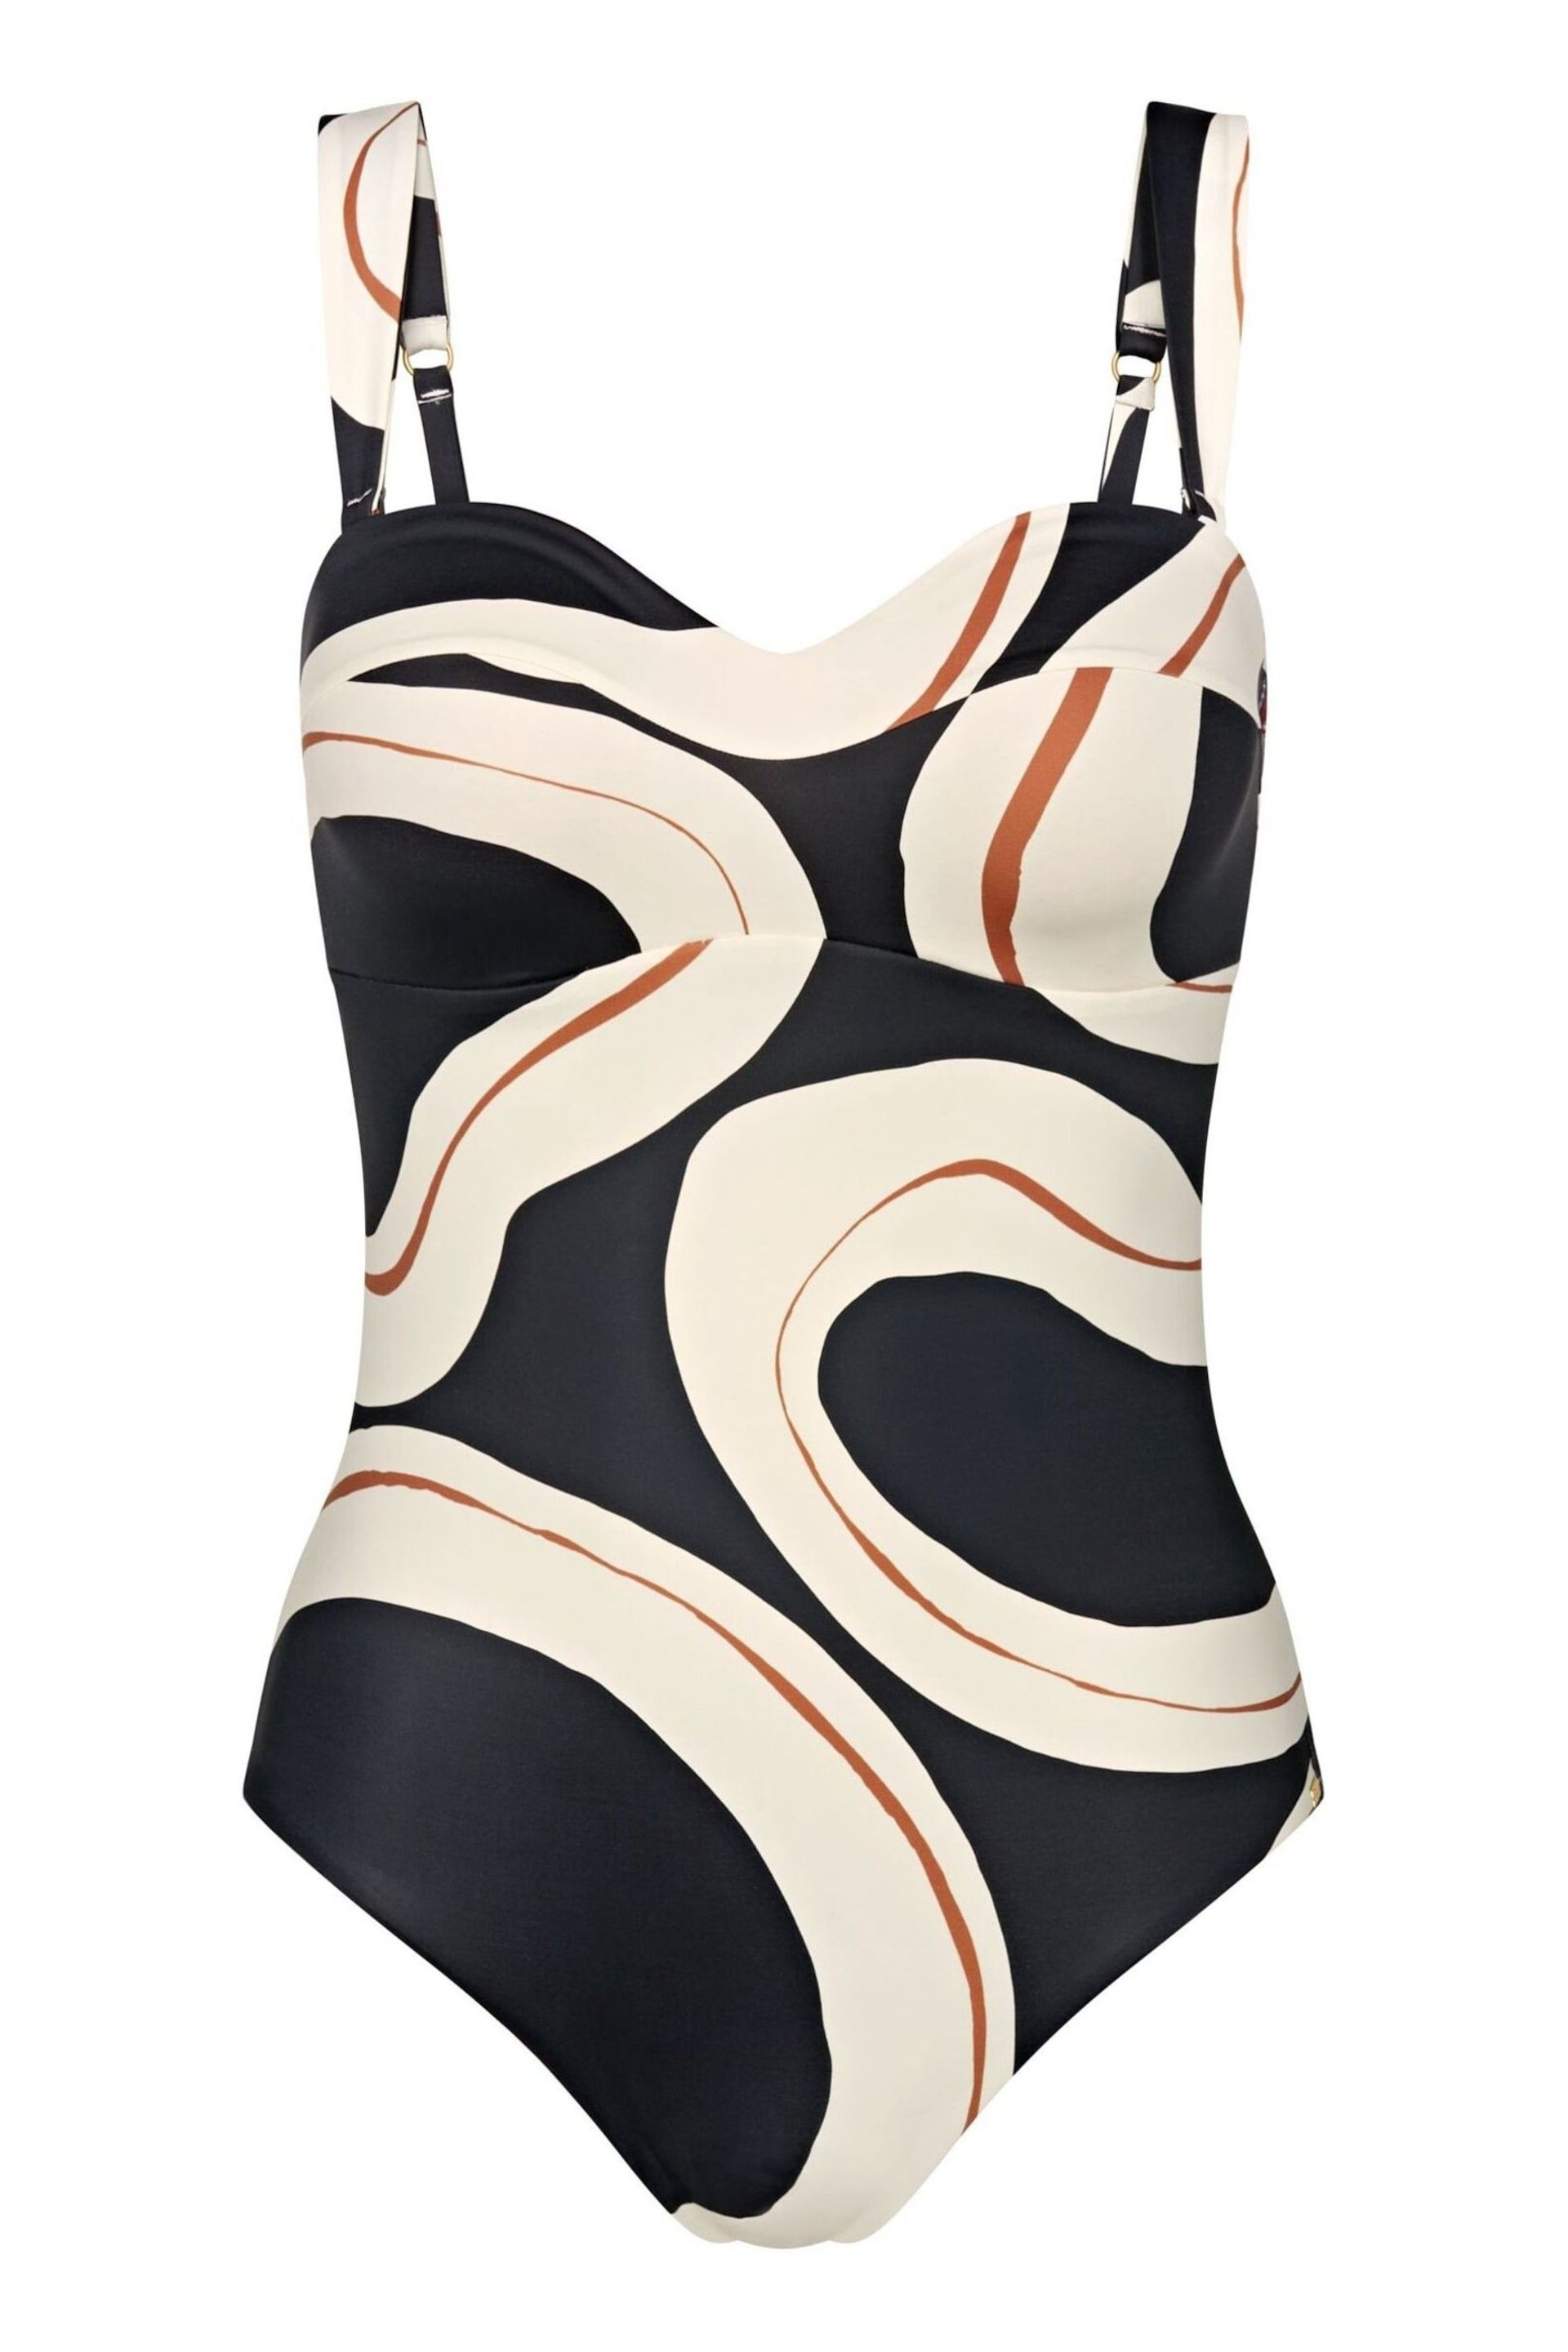 Triumph Summer Allure Padded Black Swimsuit - Image 4 of 4